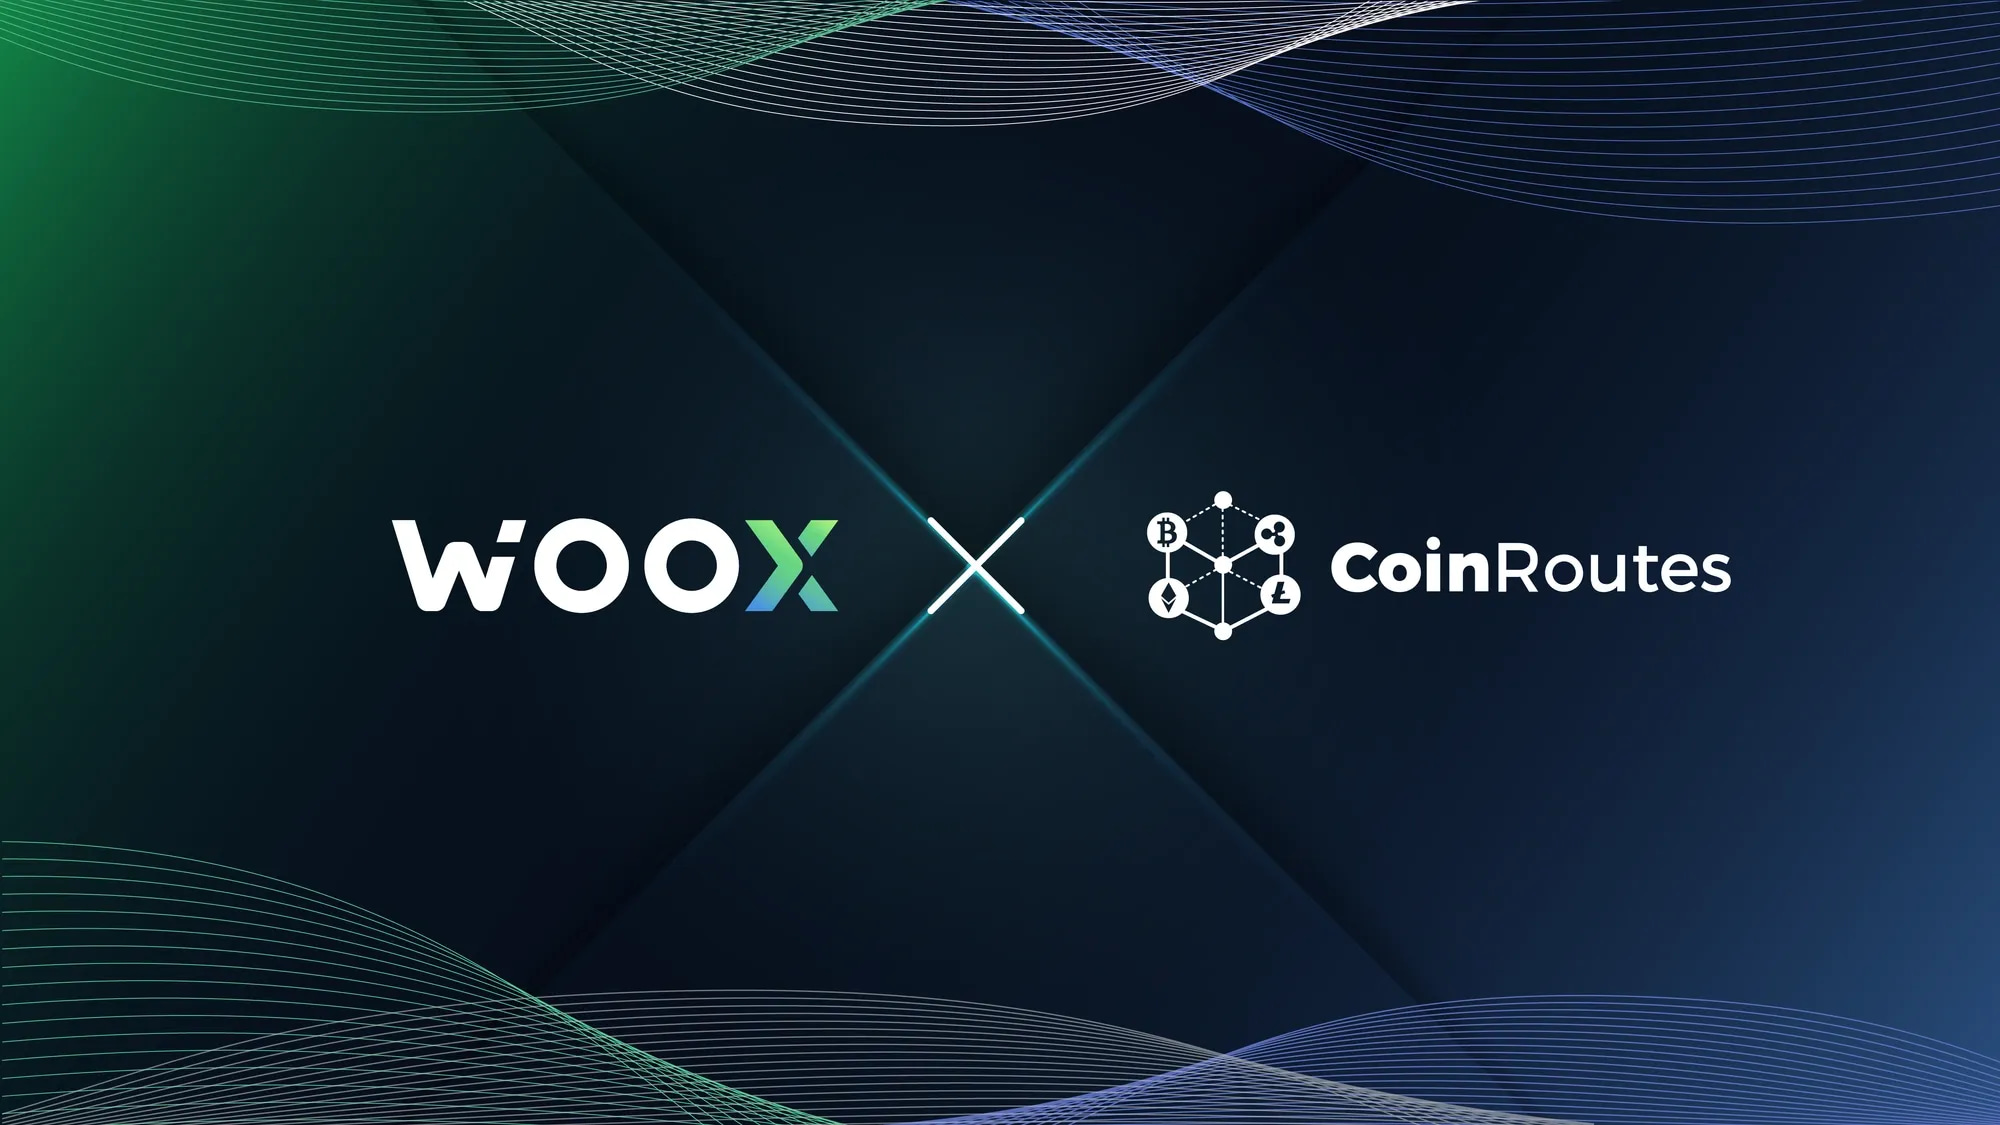 WOO X Global 與 CoinRoutes 達成合作